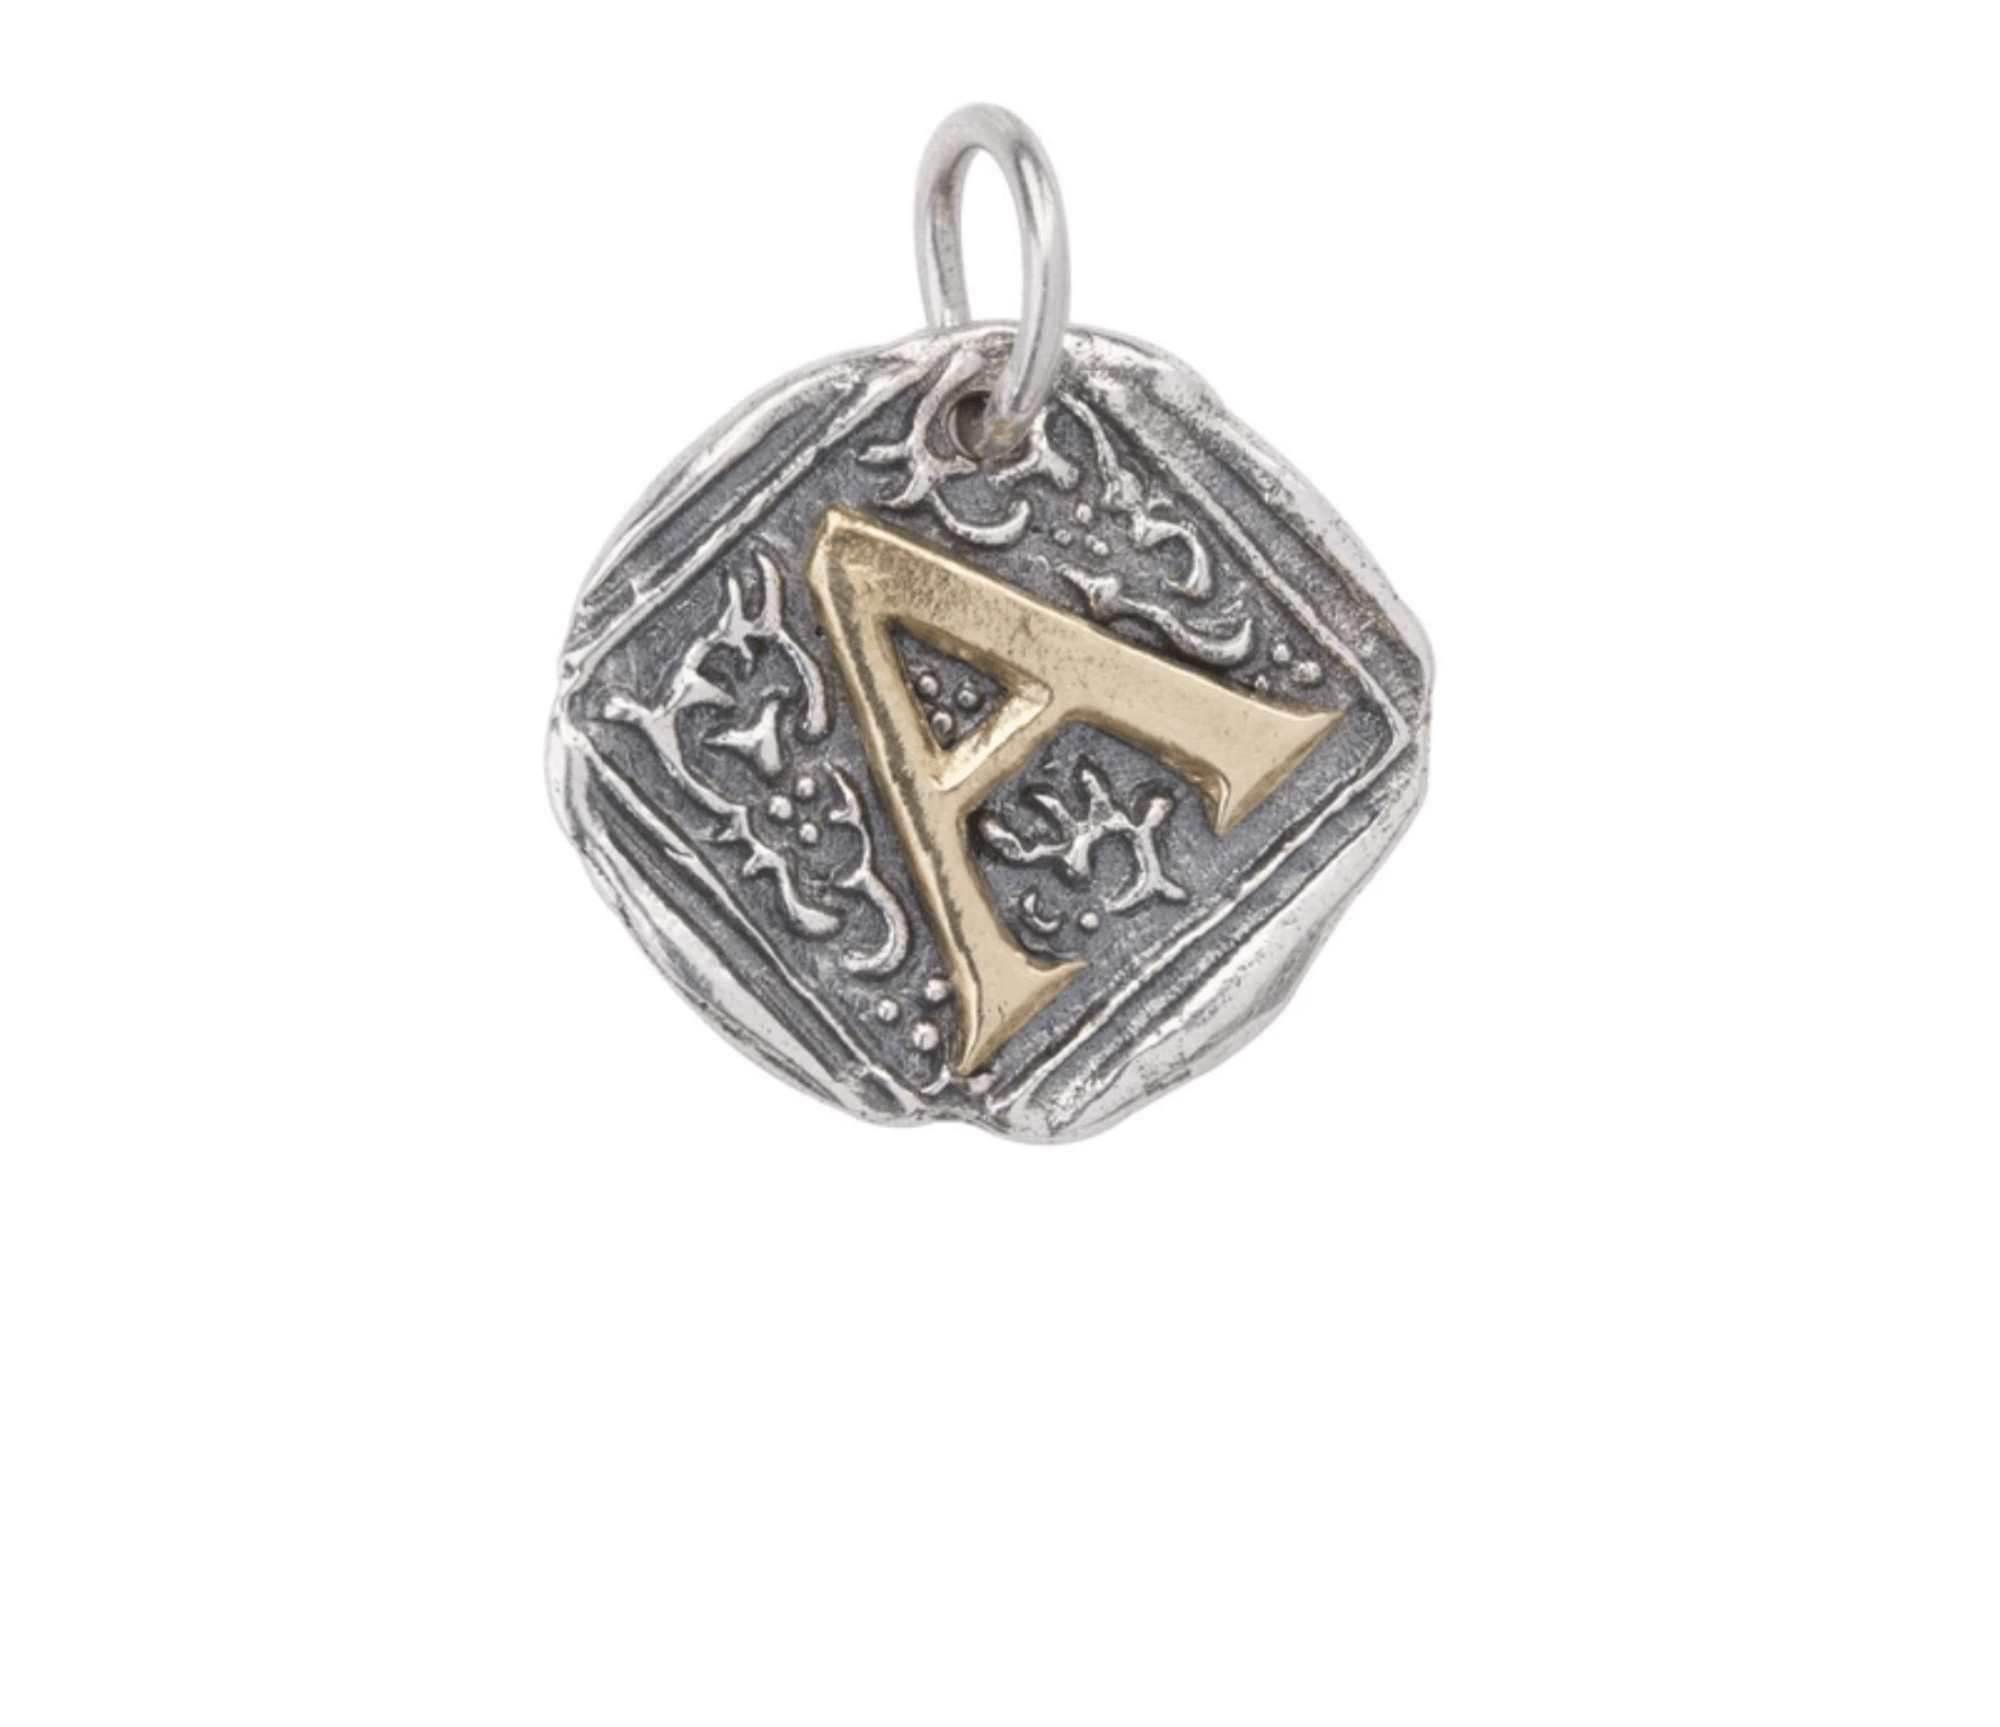 Century Insignia - Initial Charm, $77 at Waxing Poetic